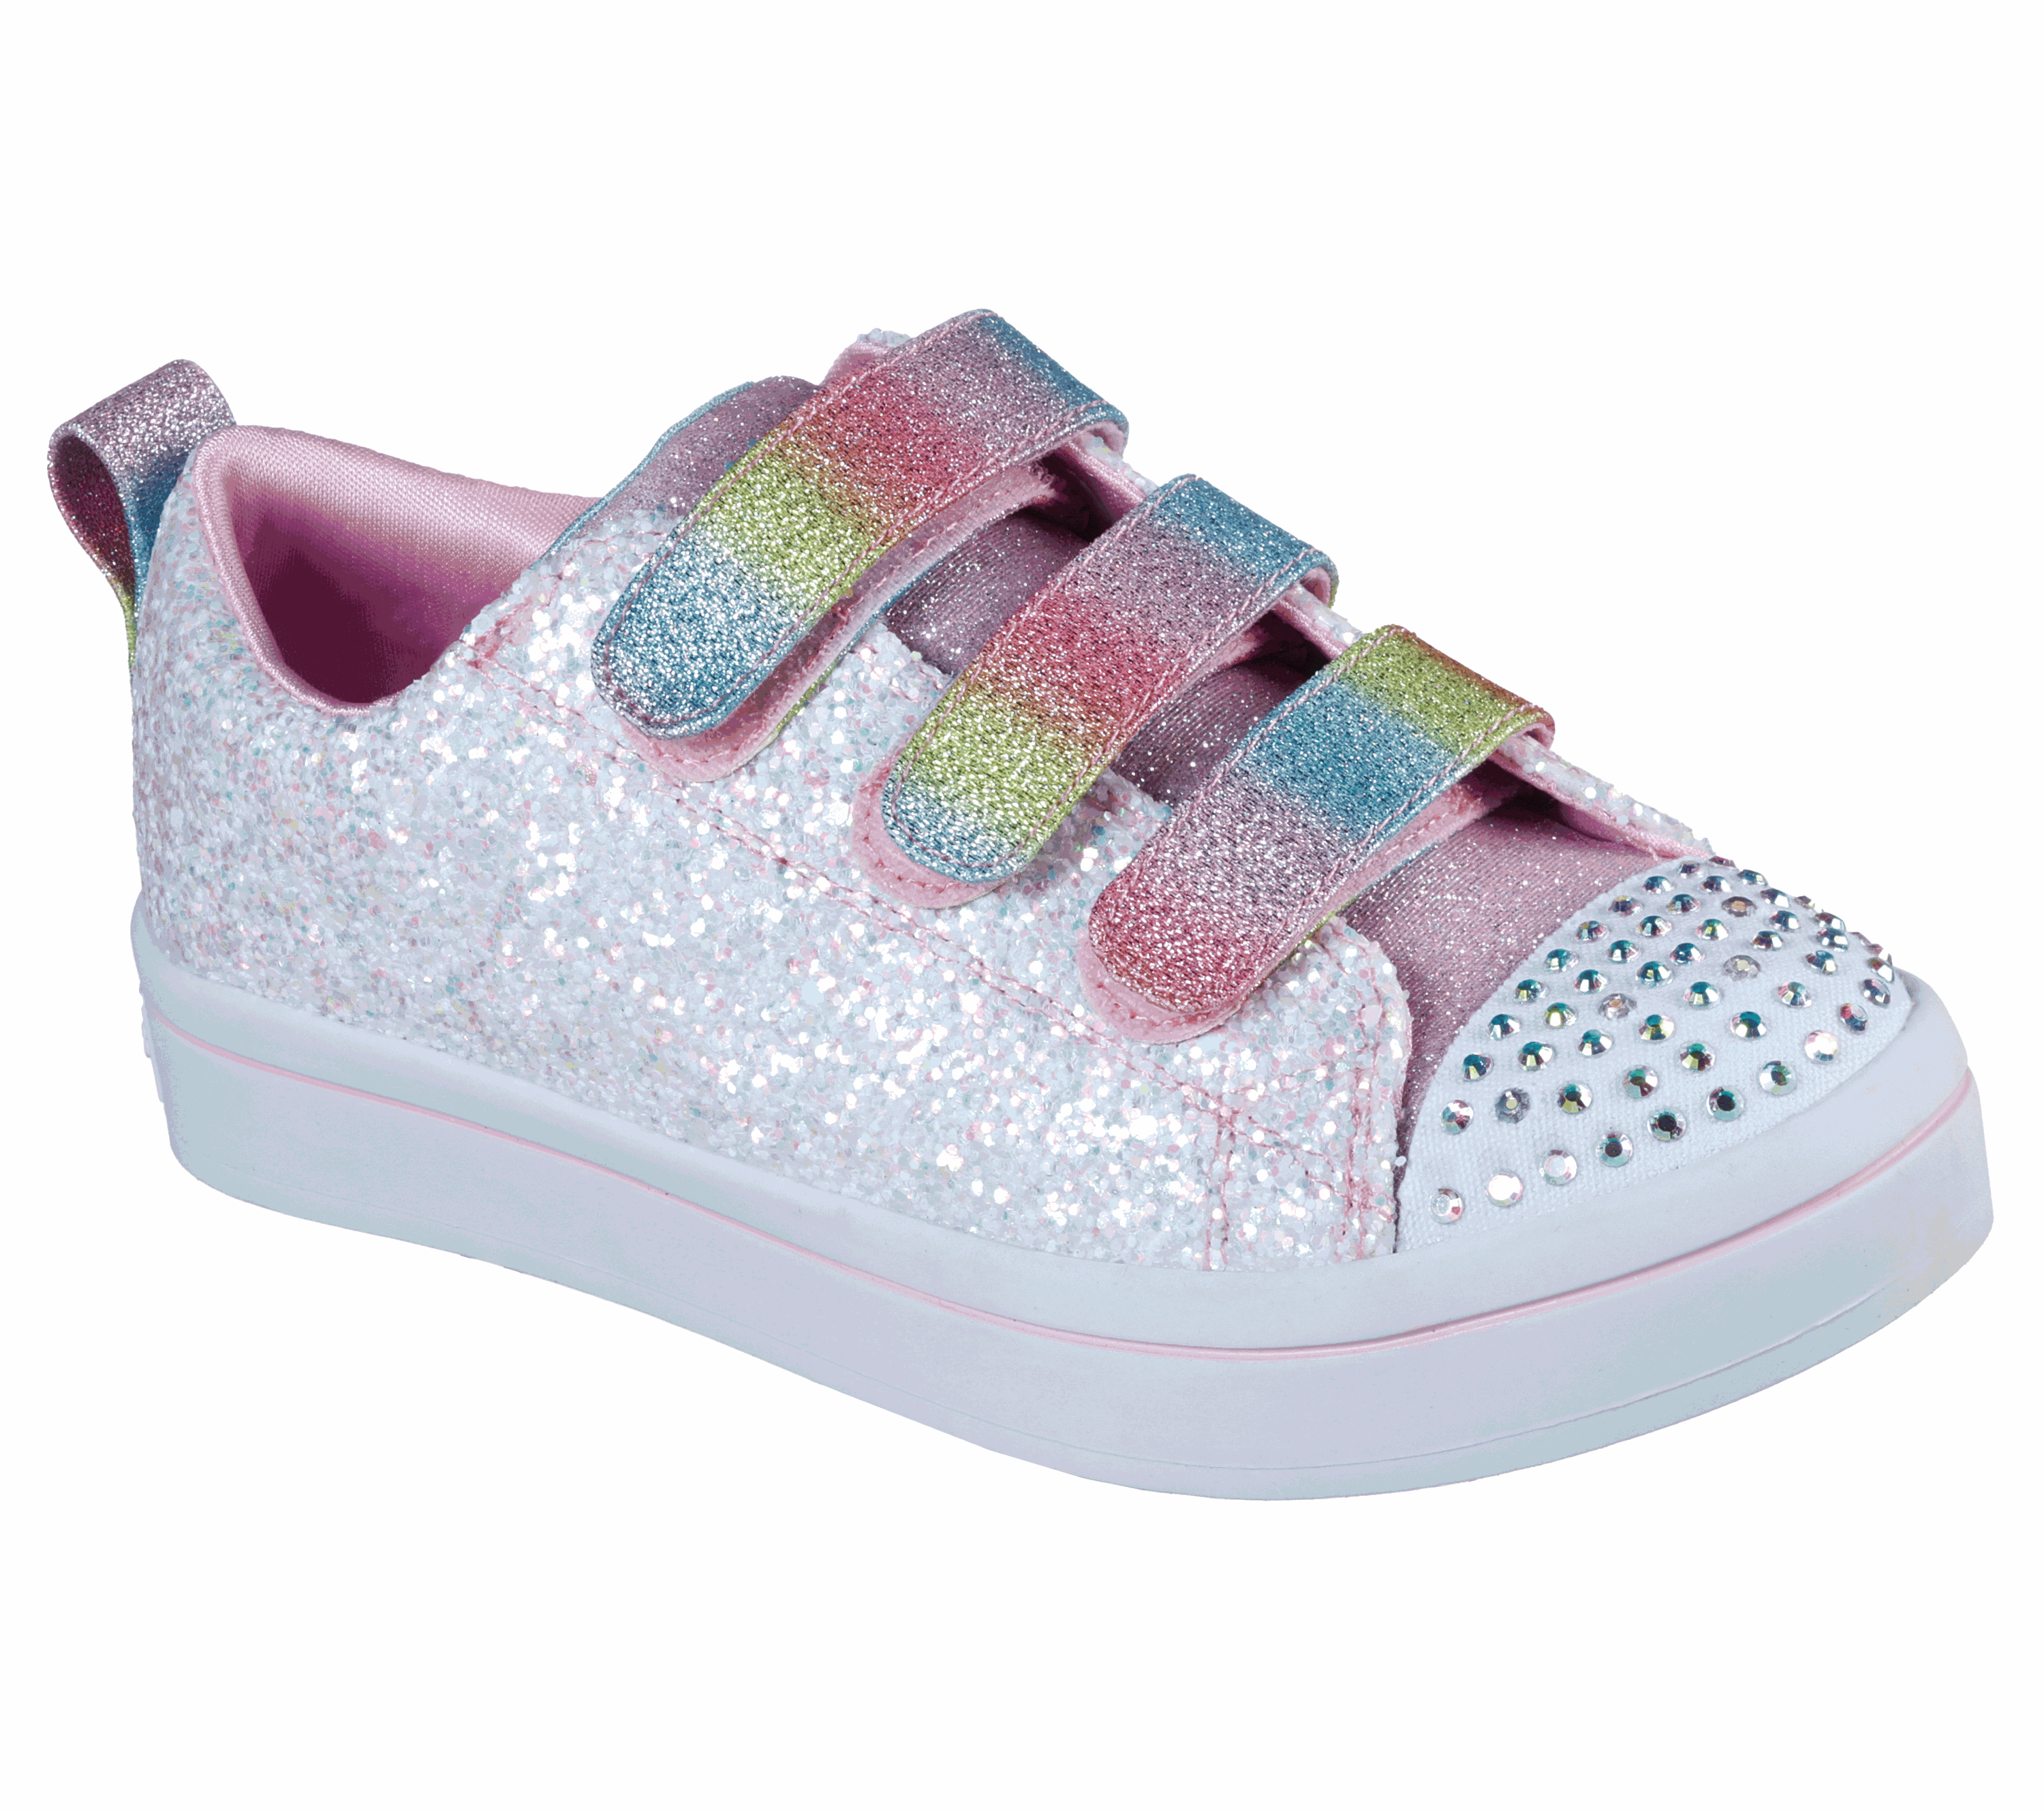 skechers twinkle toes canvas shoes children's